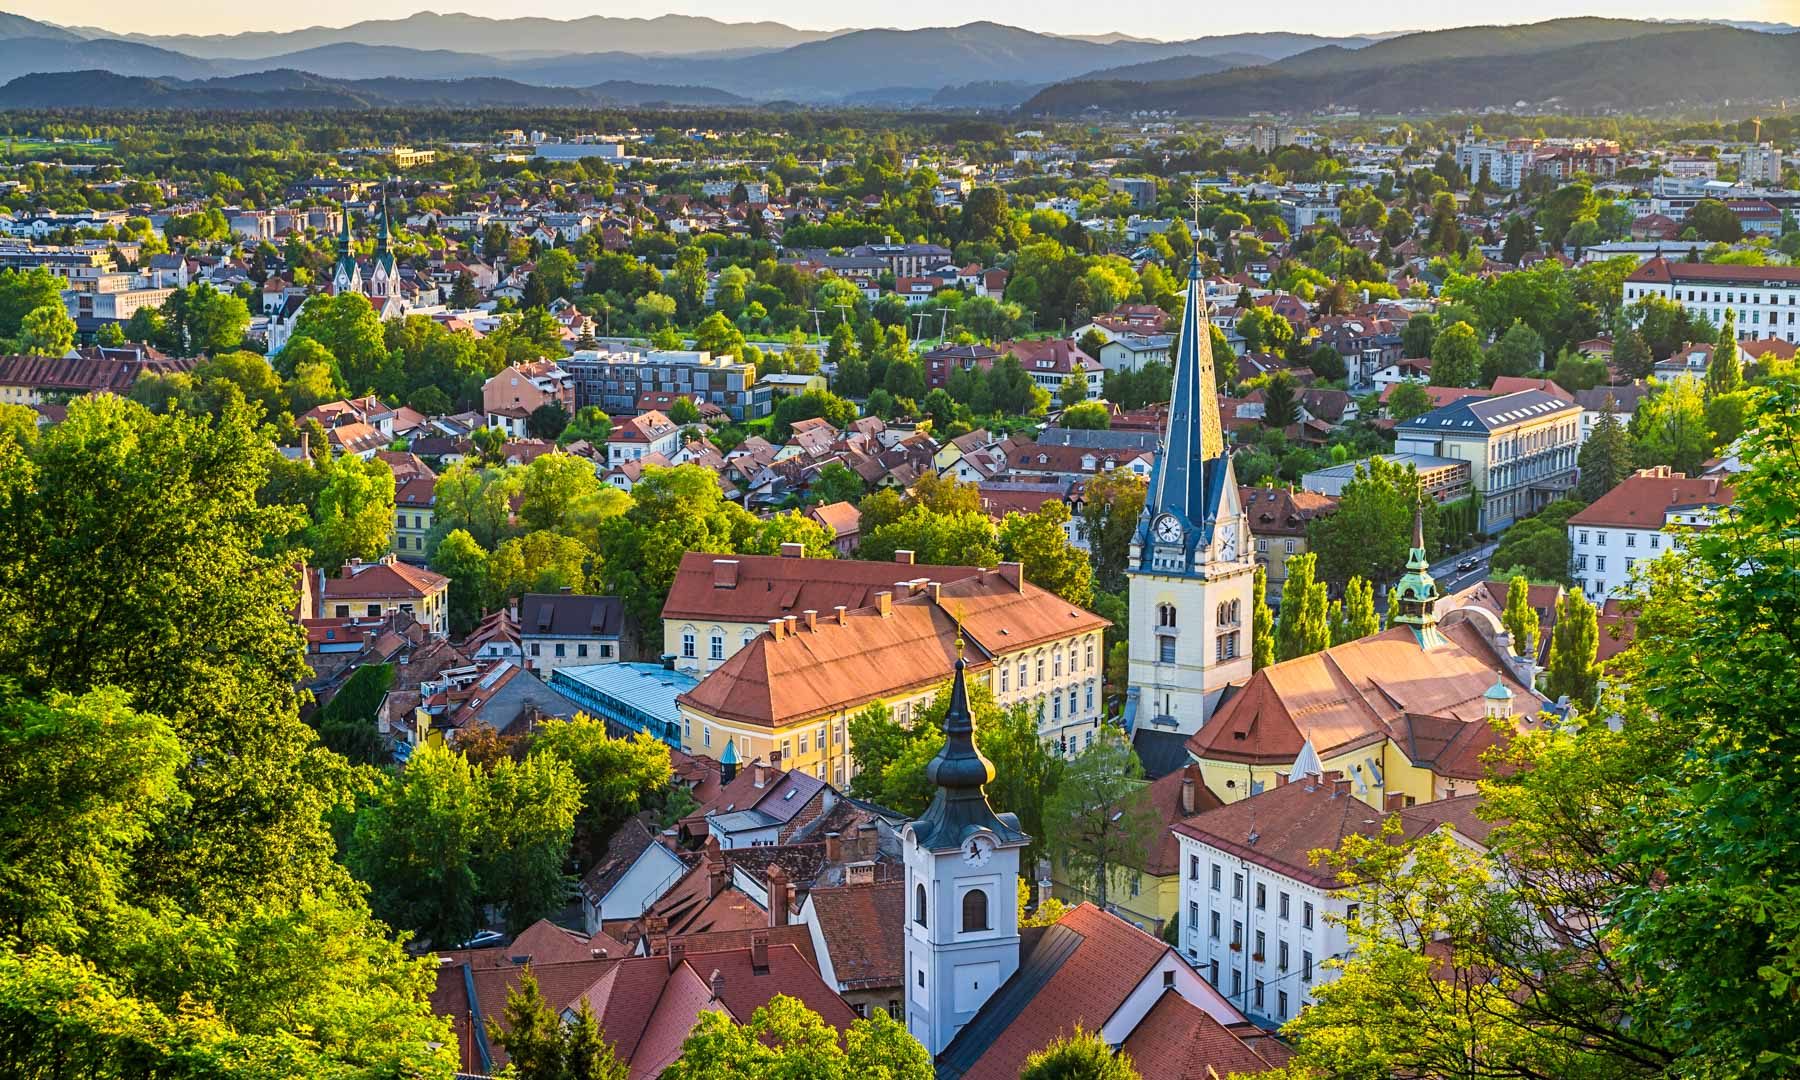 What to Do in Ljubljana, Slovenia: Highlights of the City